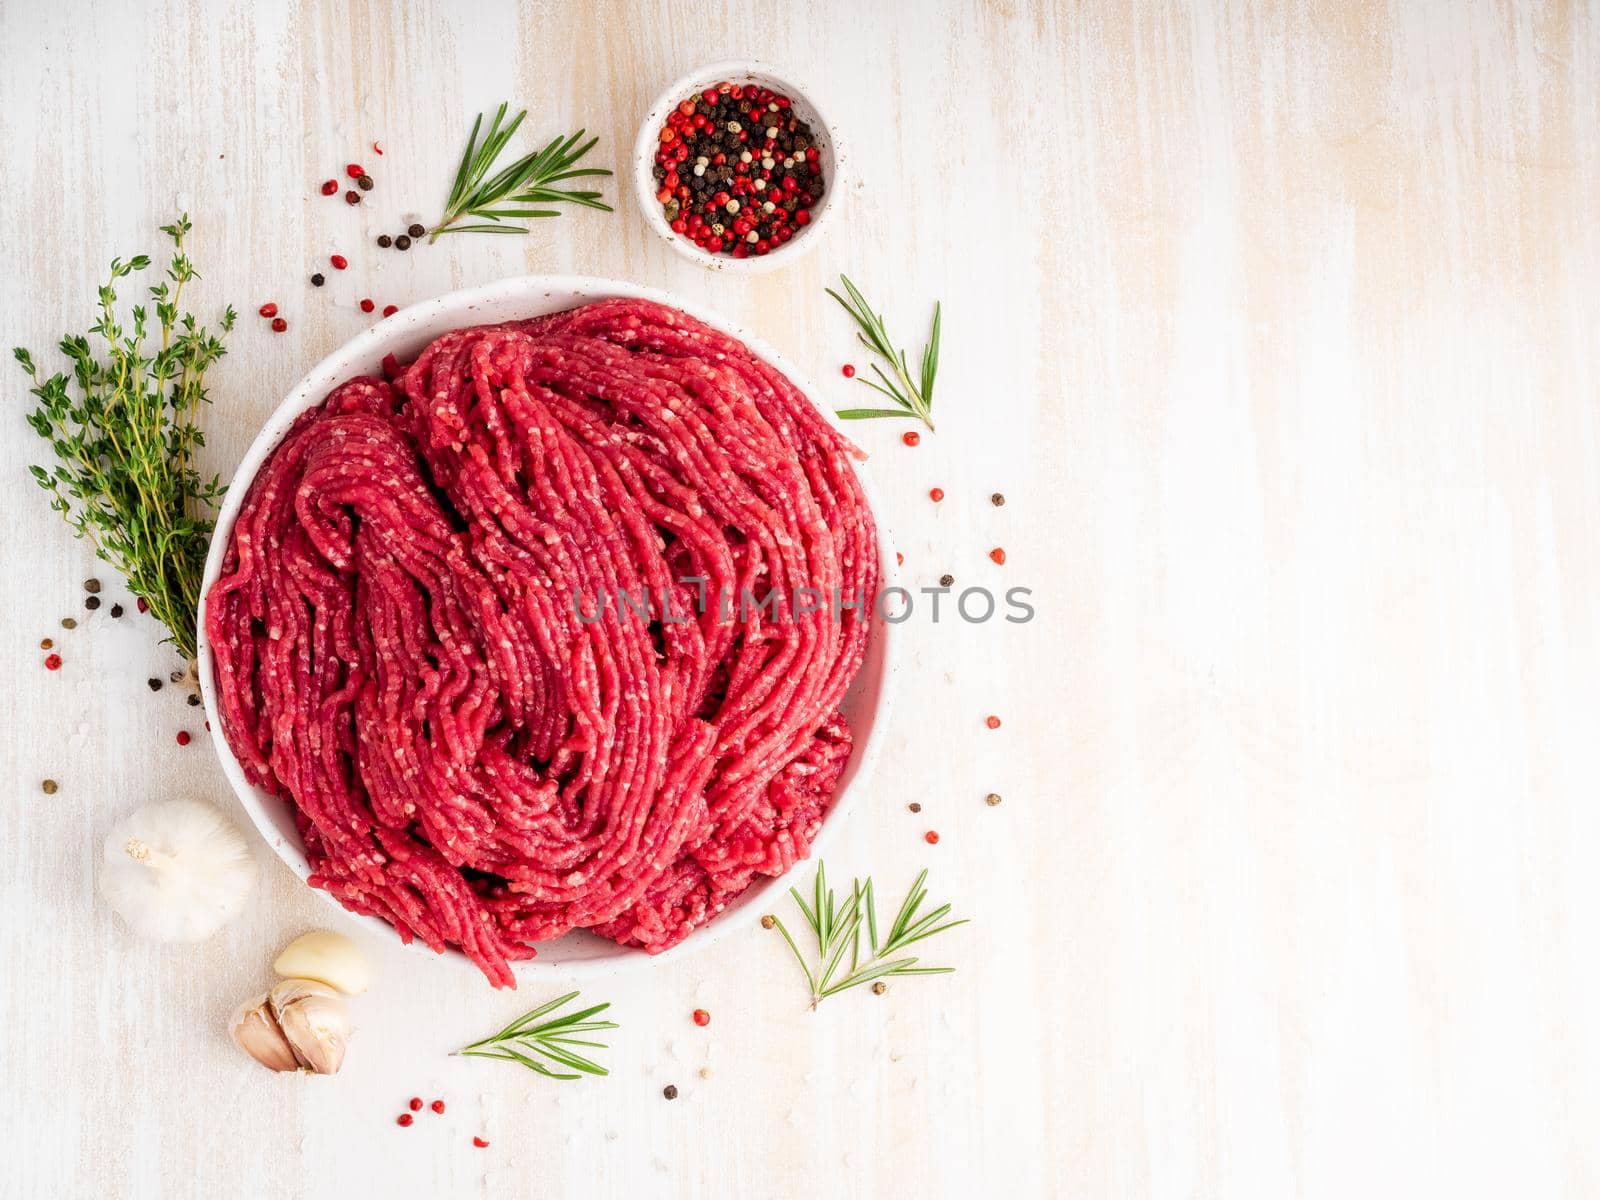 Mince beef, ground meat with ingredients for cooking on white wooden rustic table, top view, copy space